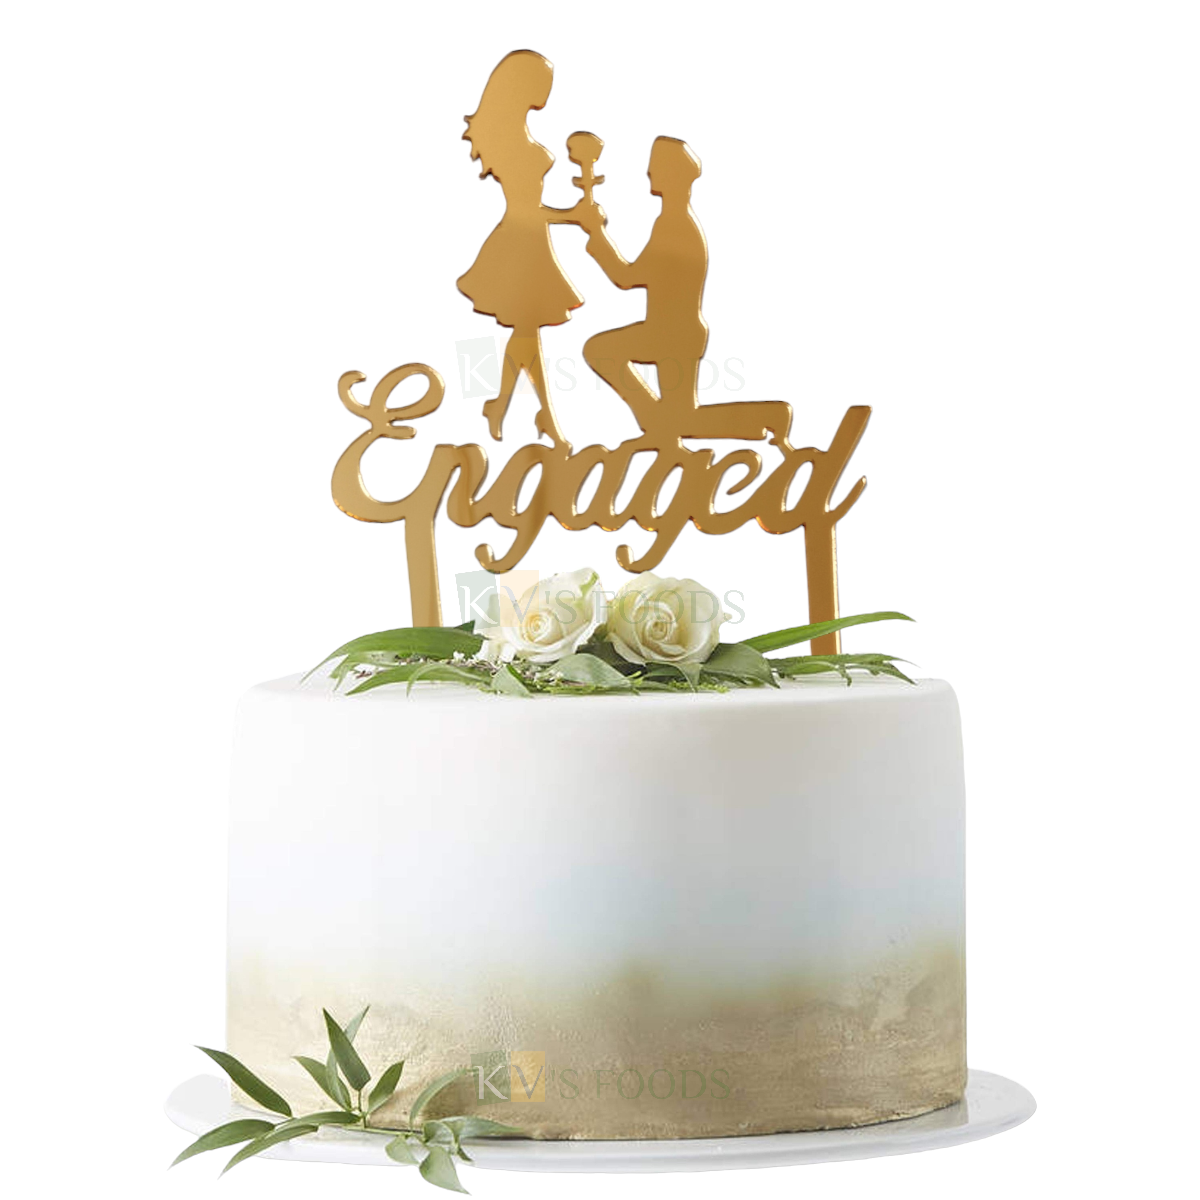 1PC Golden Acrylic Shiny Glass Finish Groom On Knee Proposing Bride With Flower Engaged Letters Cake Topper, Romantic Couples Cake Insert, Wedding Anniversary Theme DIY Cake Decorations